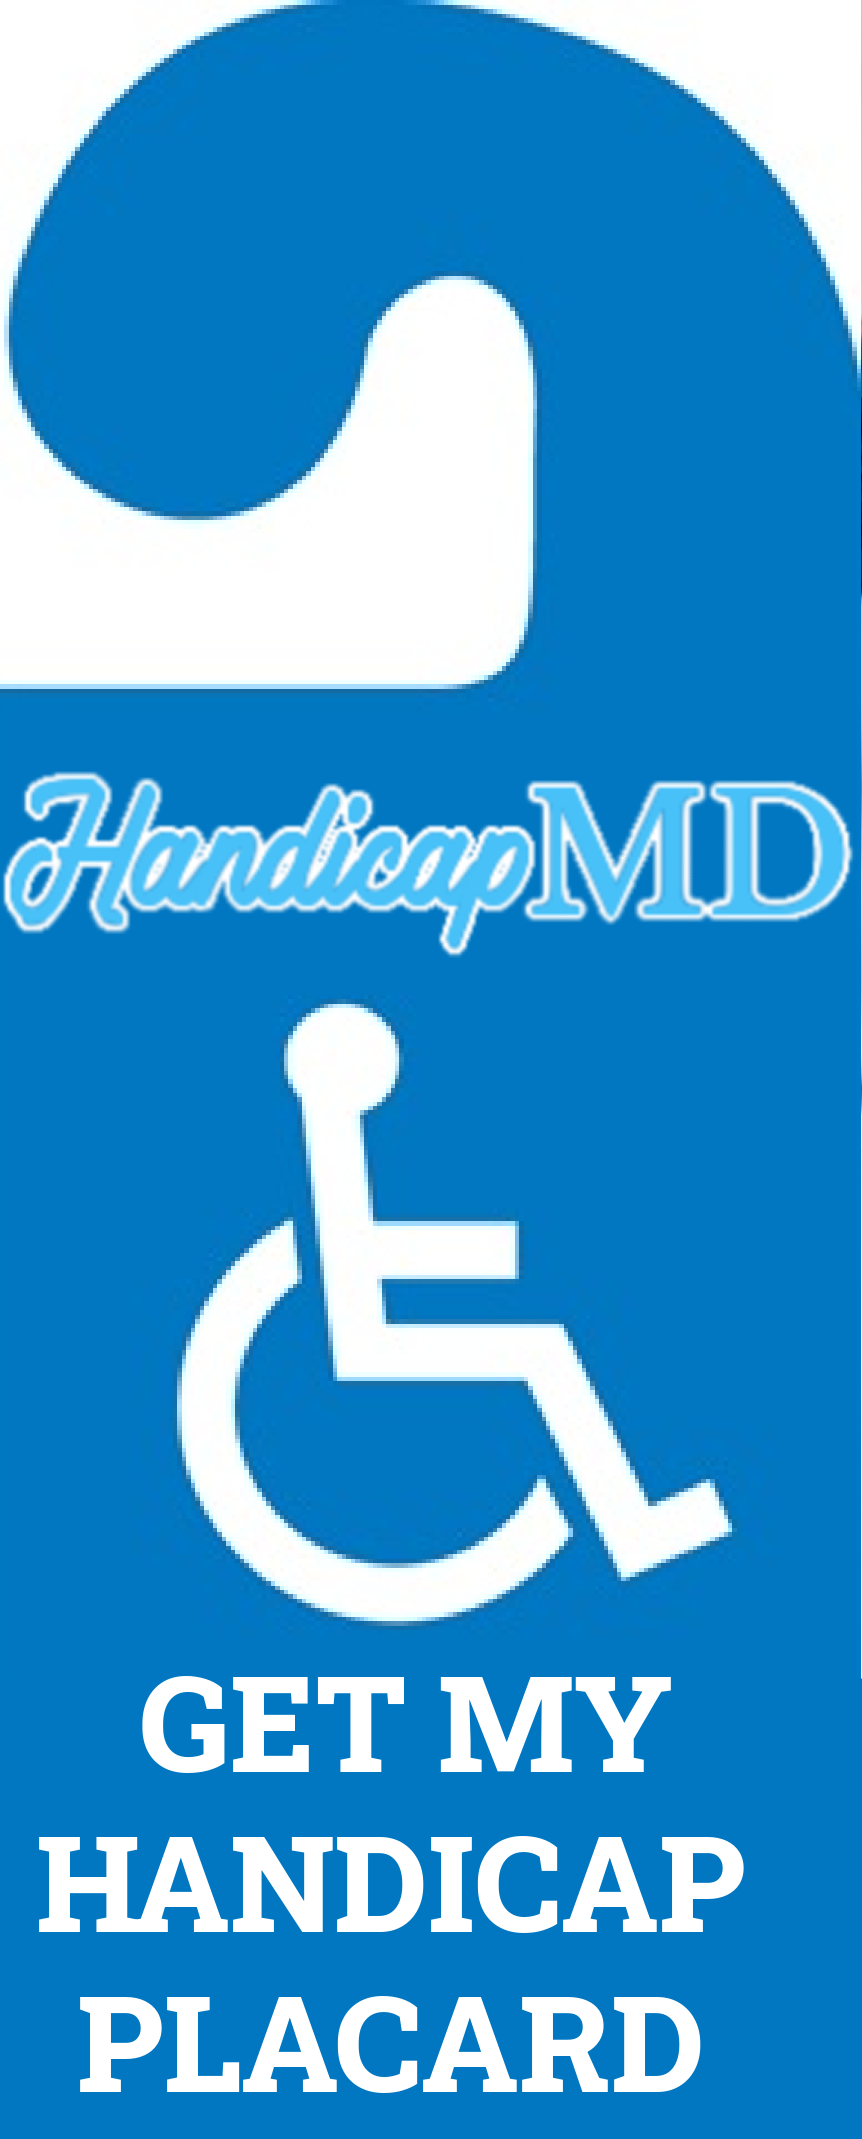 Tips for Displaying Your Handicap Placard Correctly in New York